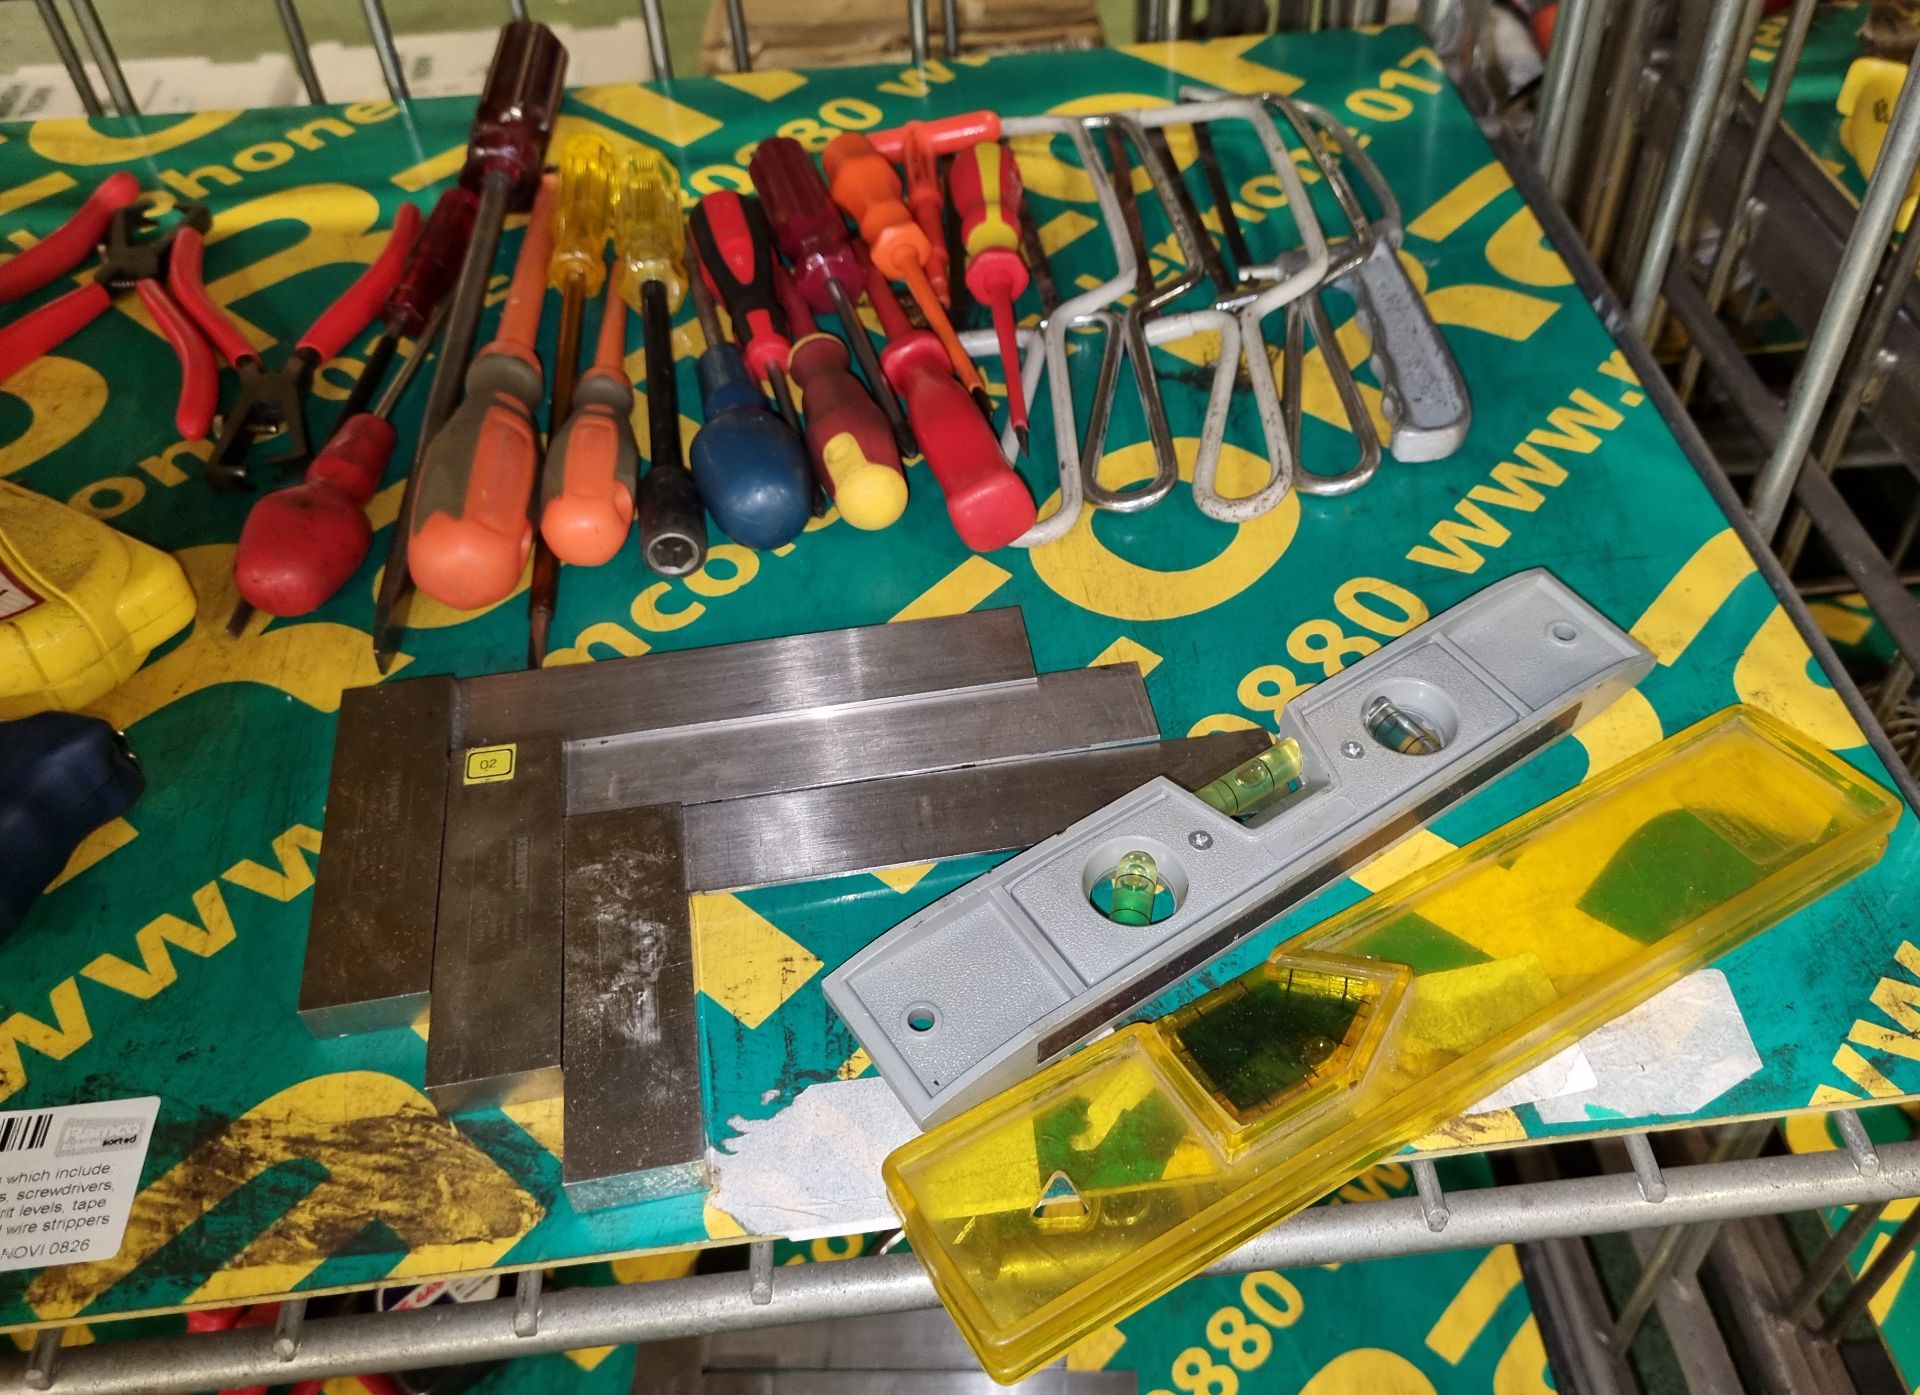 Hand tools - grips, cutters, screwdrivers, squares, spirit levels, tape measures, wire strippers - Image 2 of 4